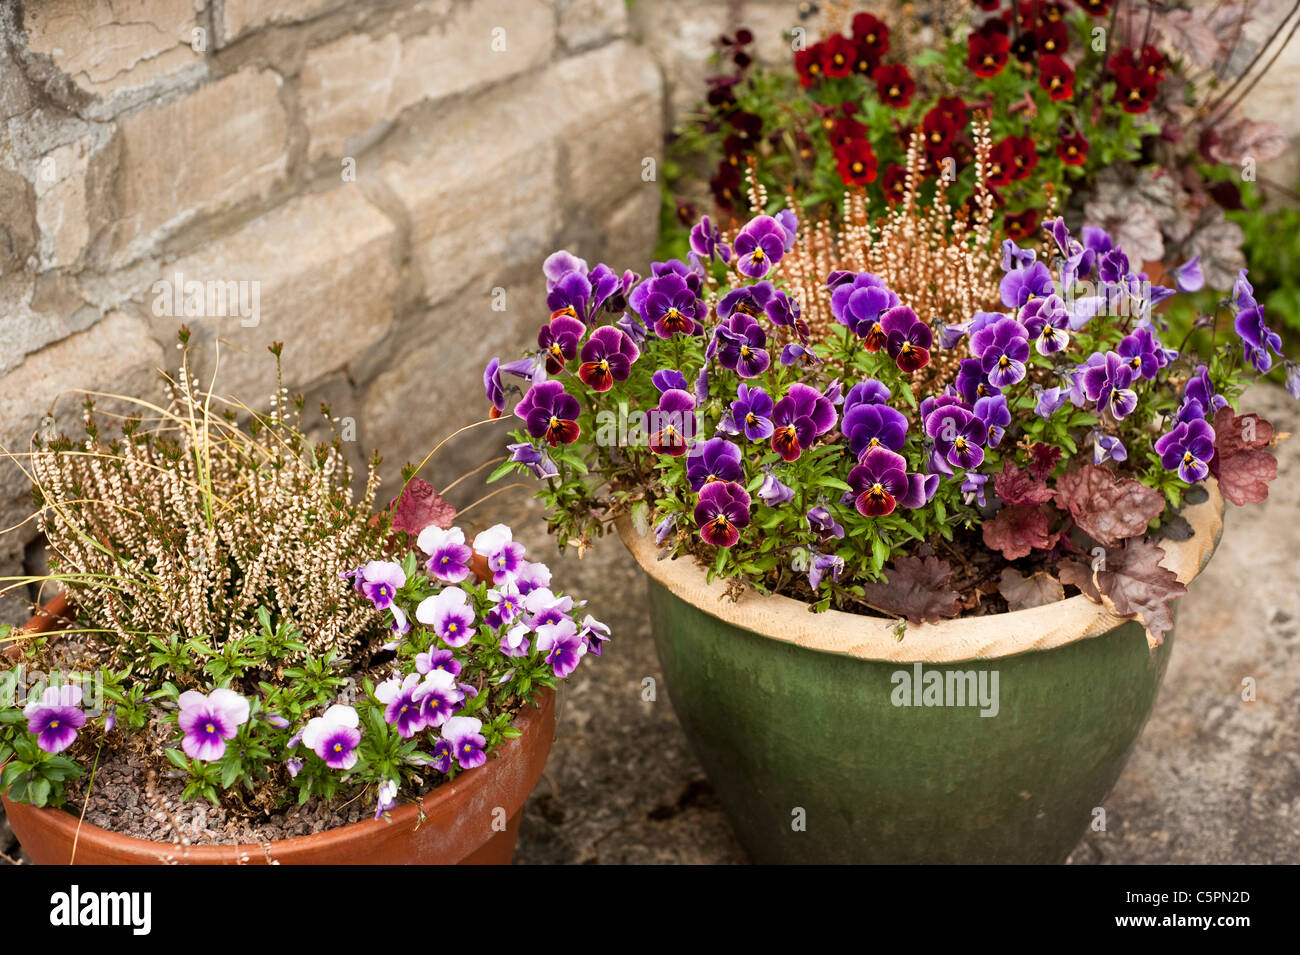 Mixed garden containers including Viola F1 'Antique Shades', 'Sorbet Blueberry Cream' and 'Rose Blotch' Stock Photo